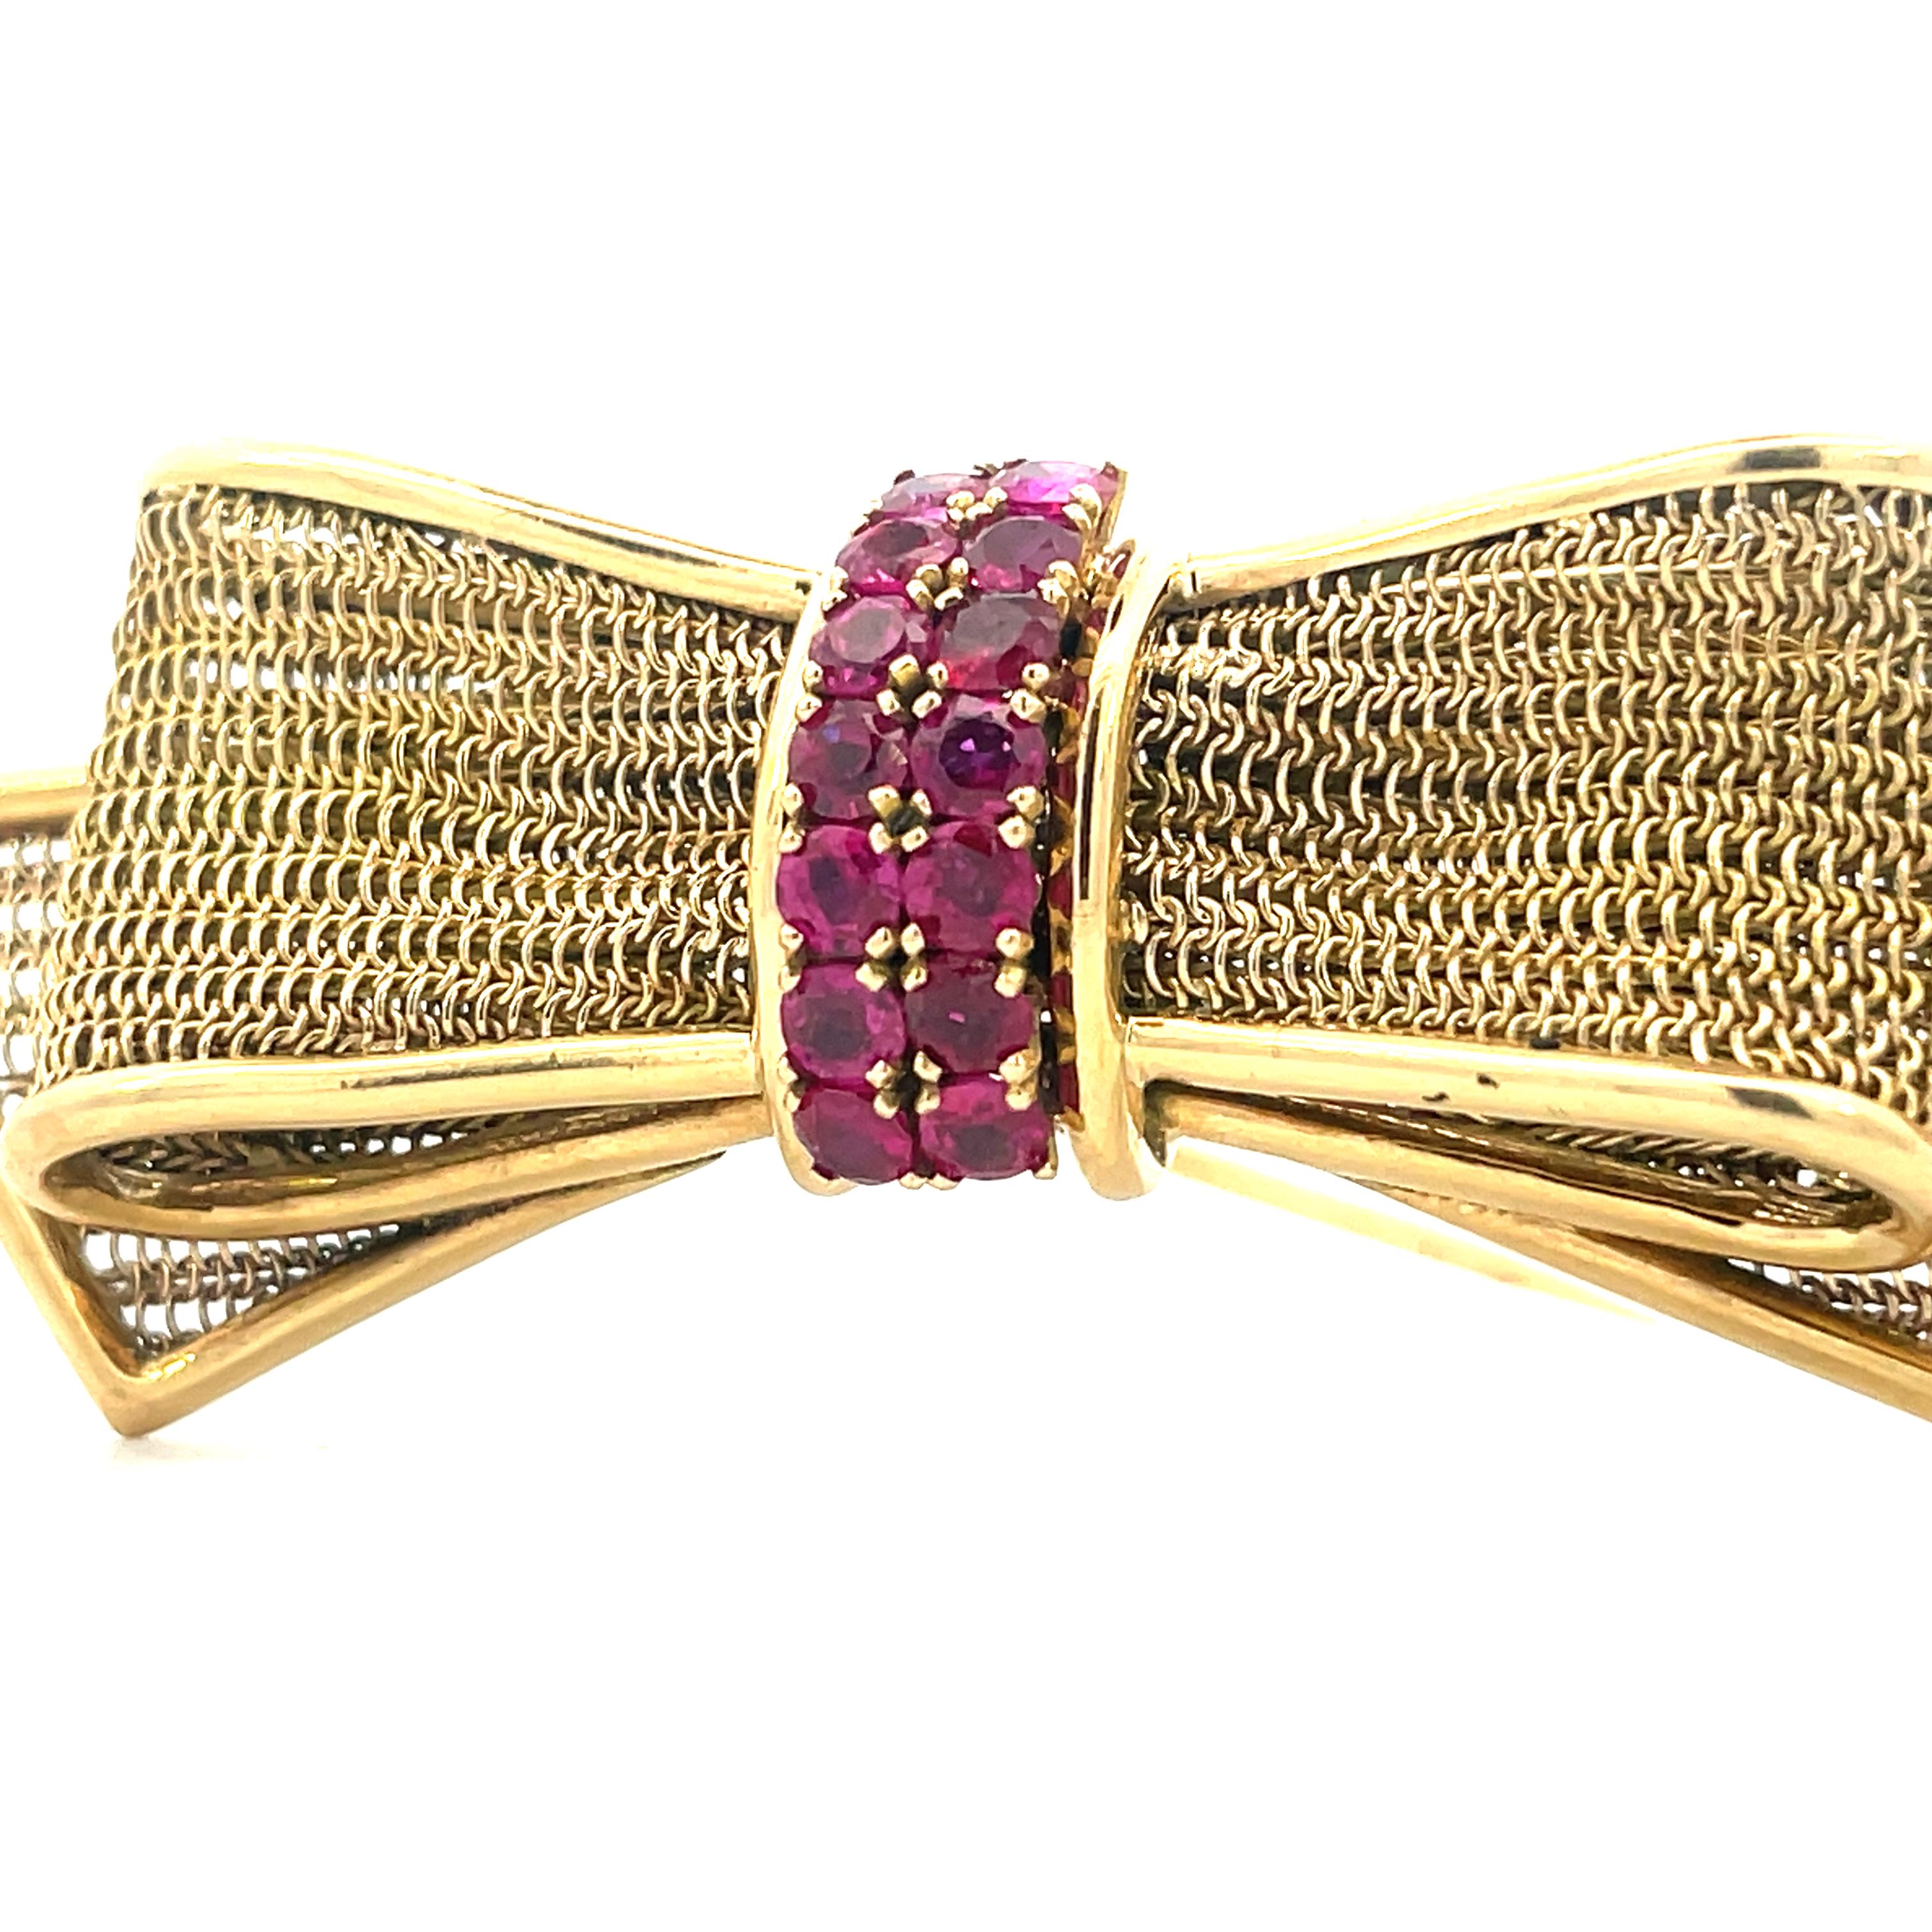 - 14K Yellow Gold 
- 14 = .85 TW Round Cut Rubies 
- 12.41 Grams 
- 1950s 

This is a stunning bow pin from the 1950s made in 14k yellow gold with vibrant round cut rubies. The bow design pin was incredibly made,  with bold 14k yellow gold borders